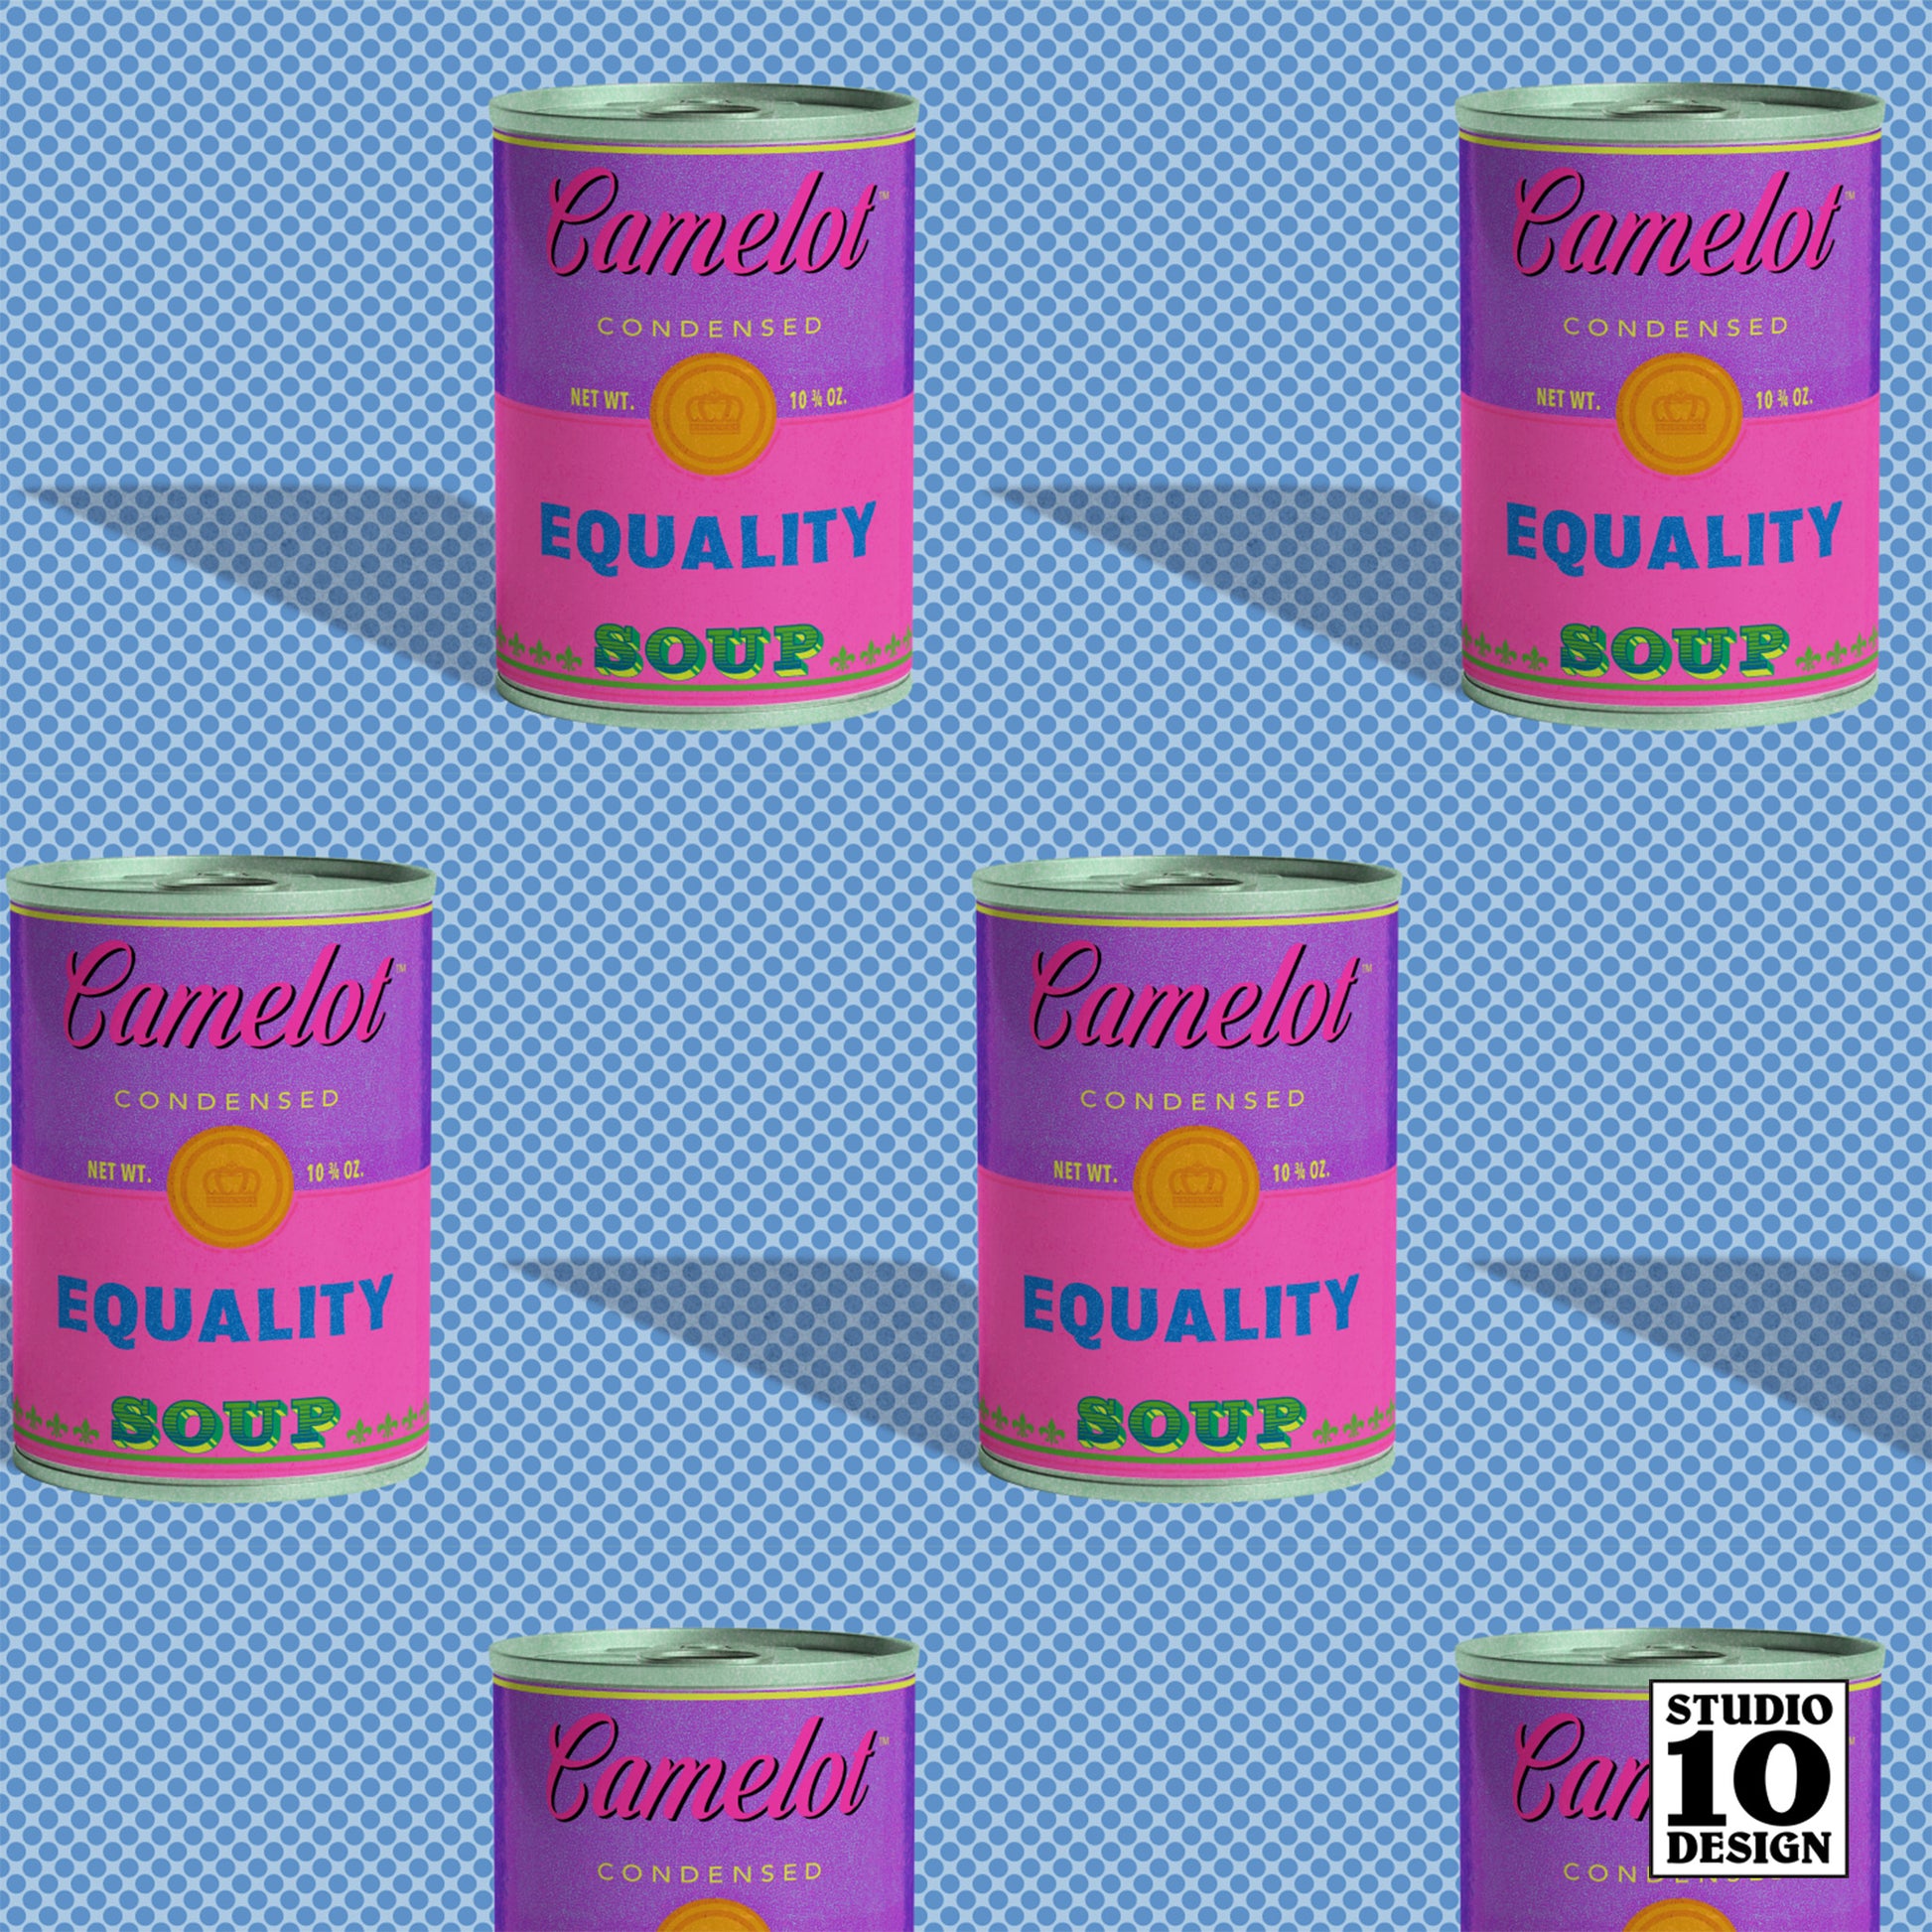 Equality Soup Cans Printed Fabric by Studio Ten Design